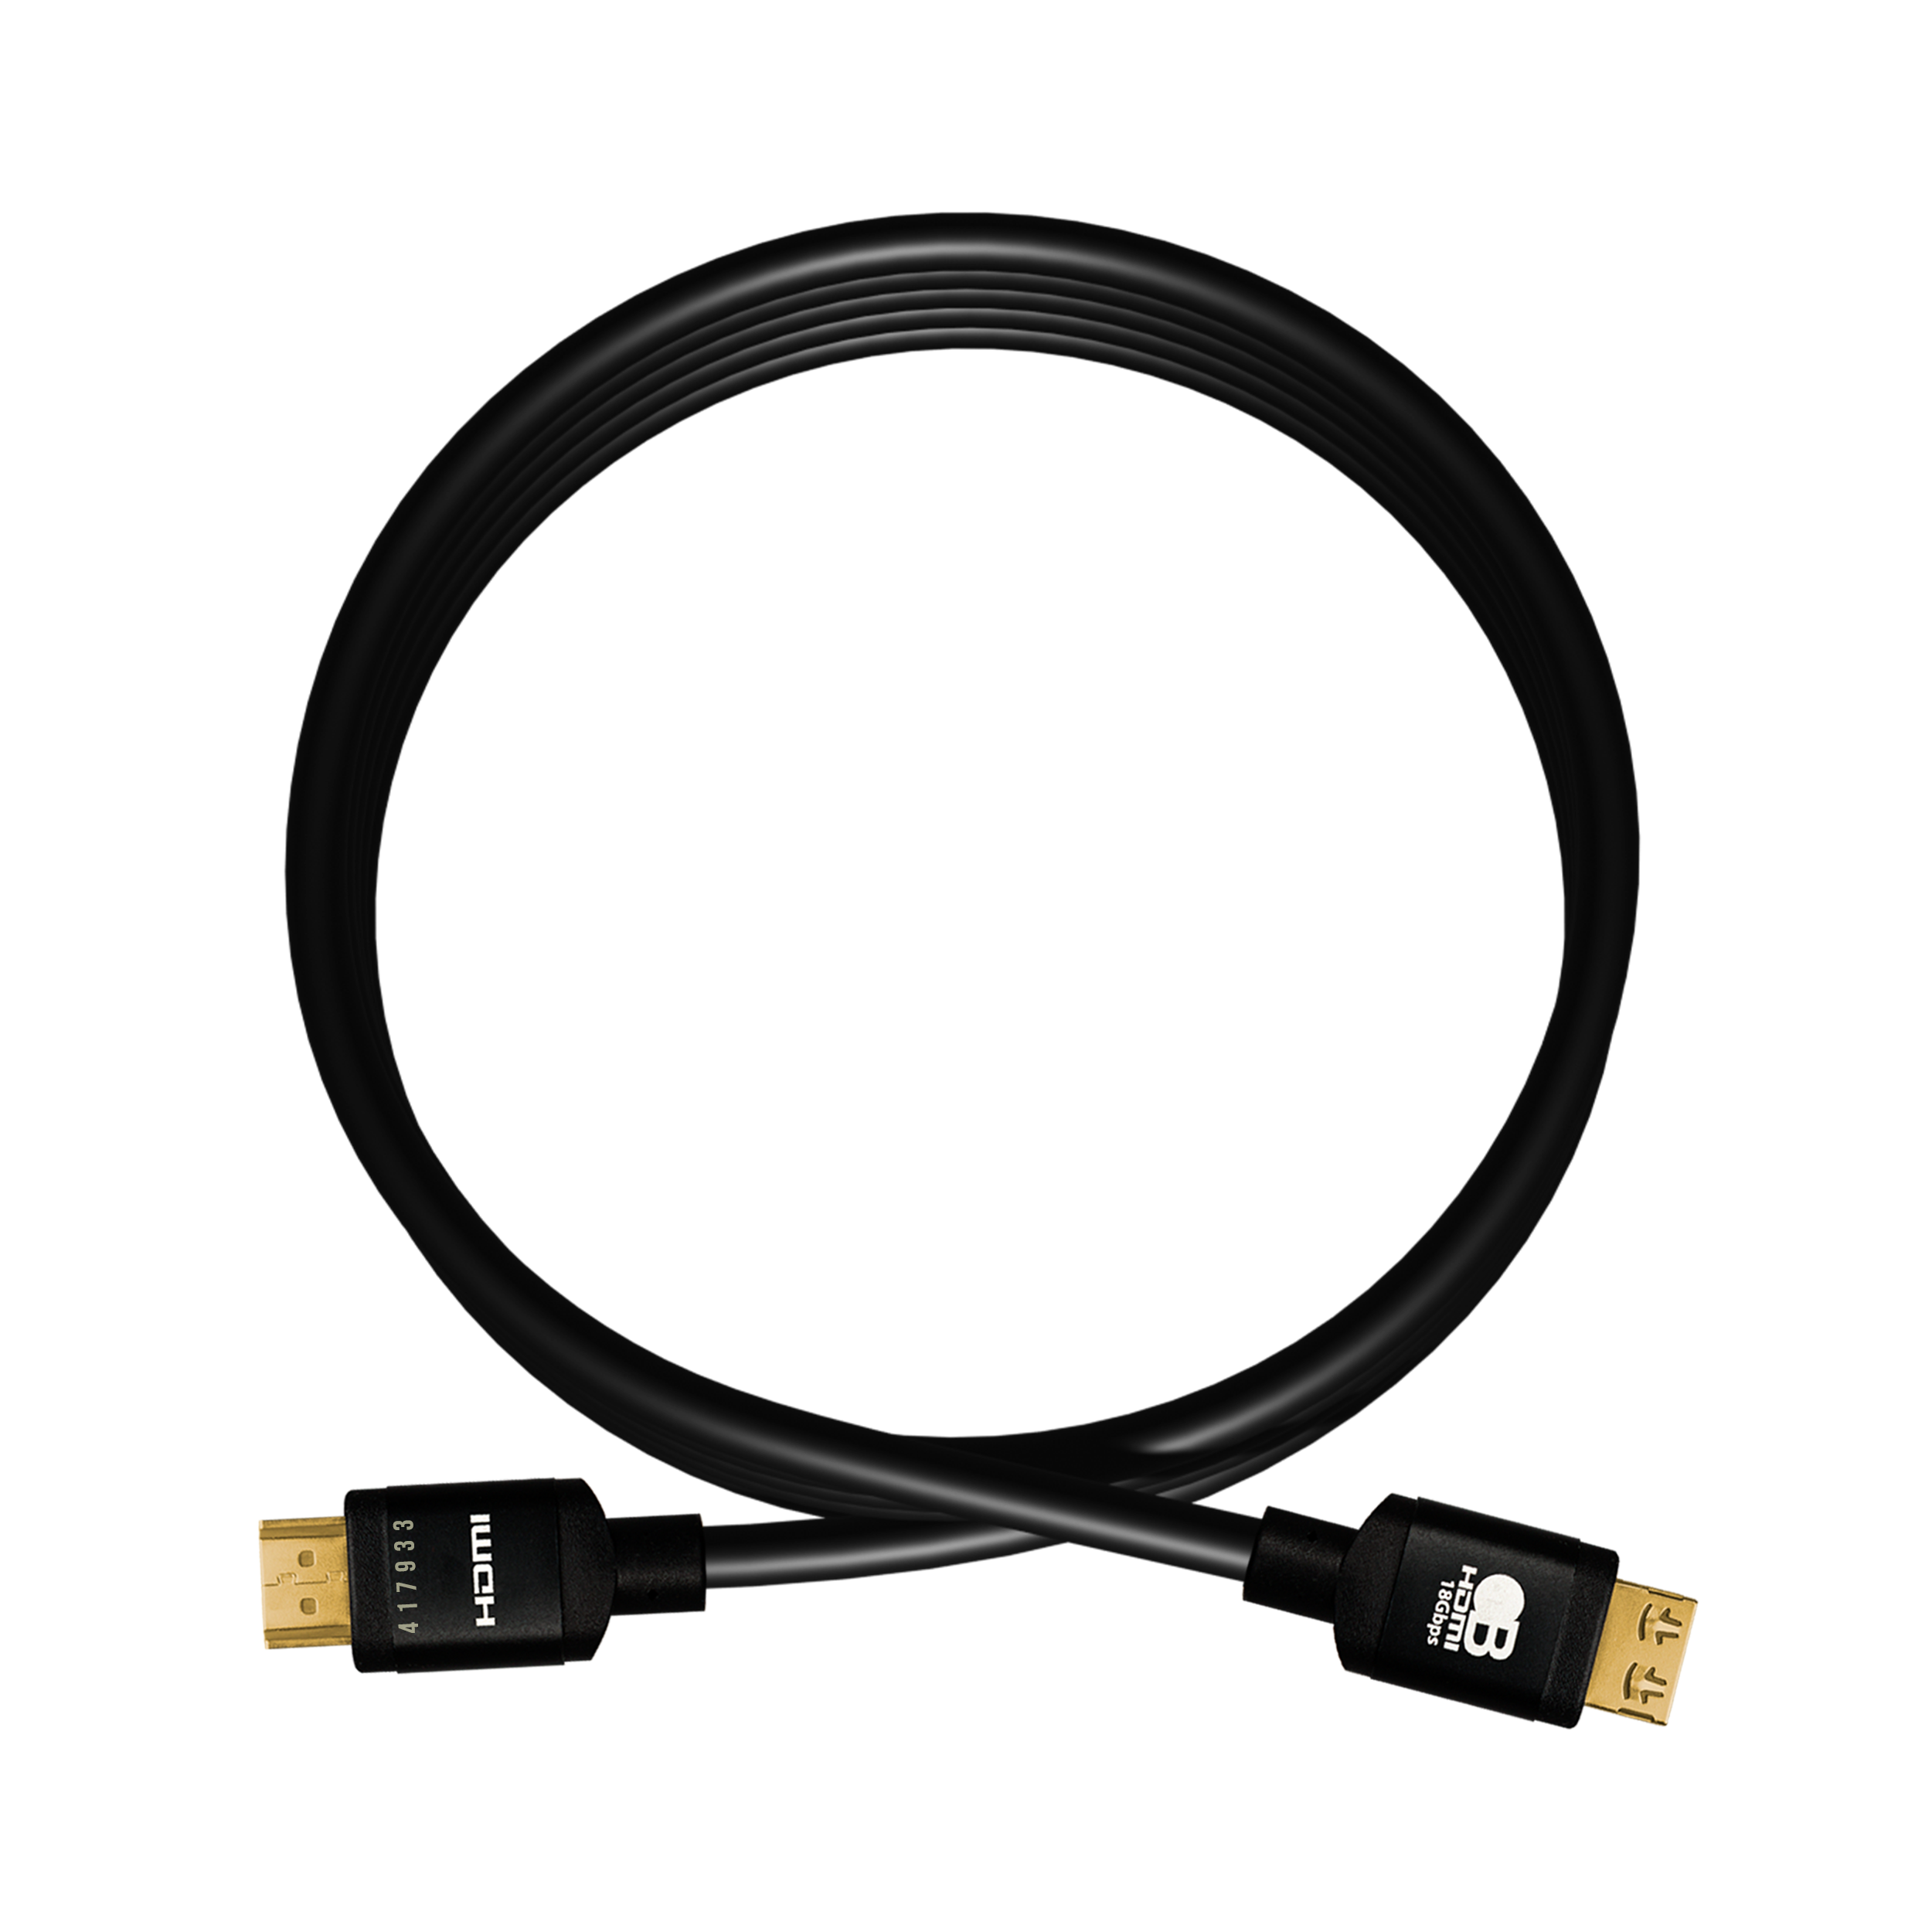 AVARRO WBXHDMI03V2 High Speed Male-Male HDMI Cable, 18GBPS